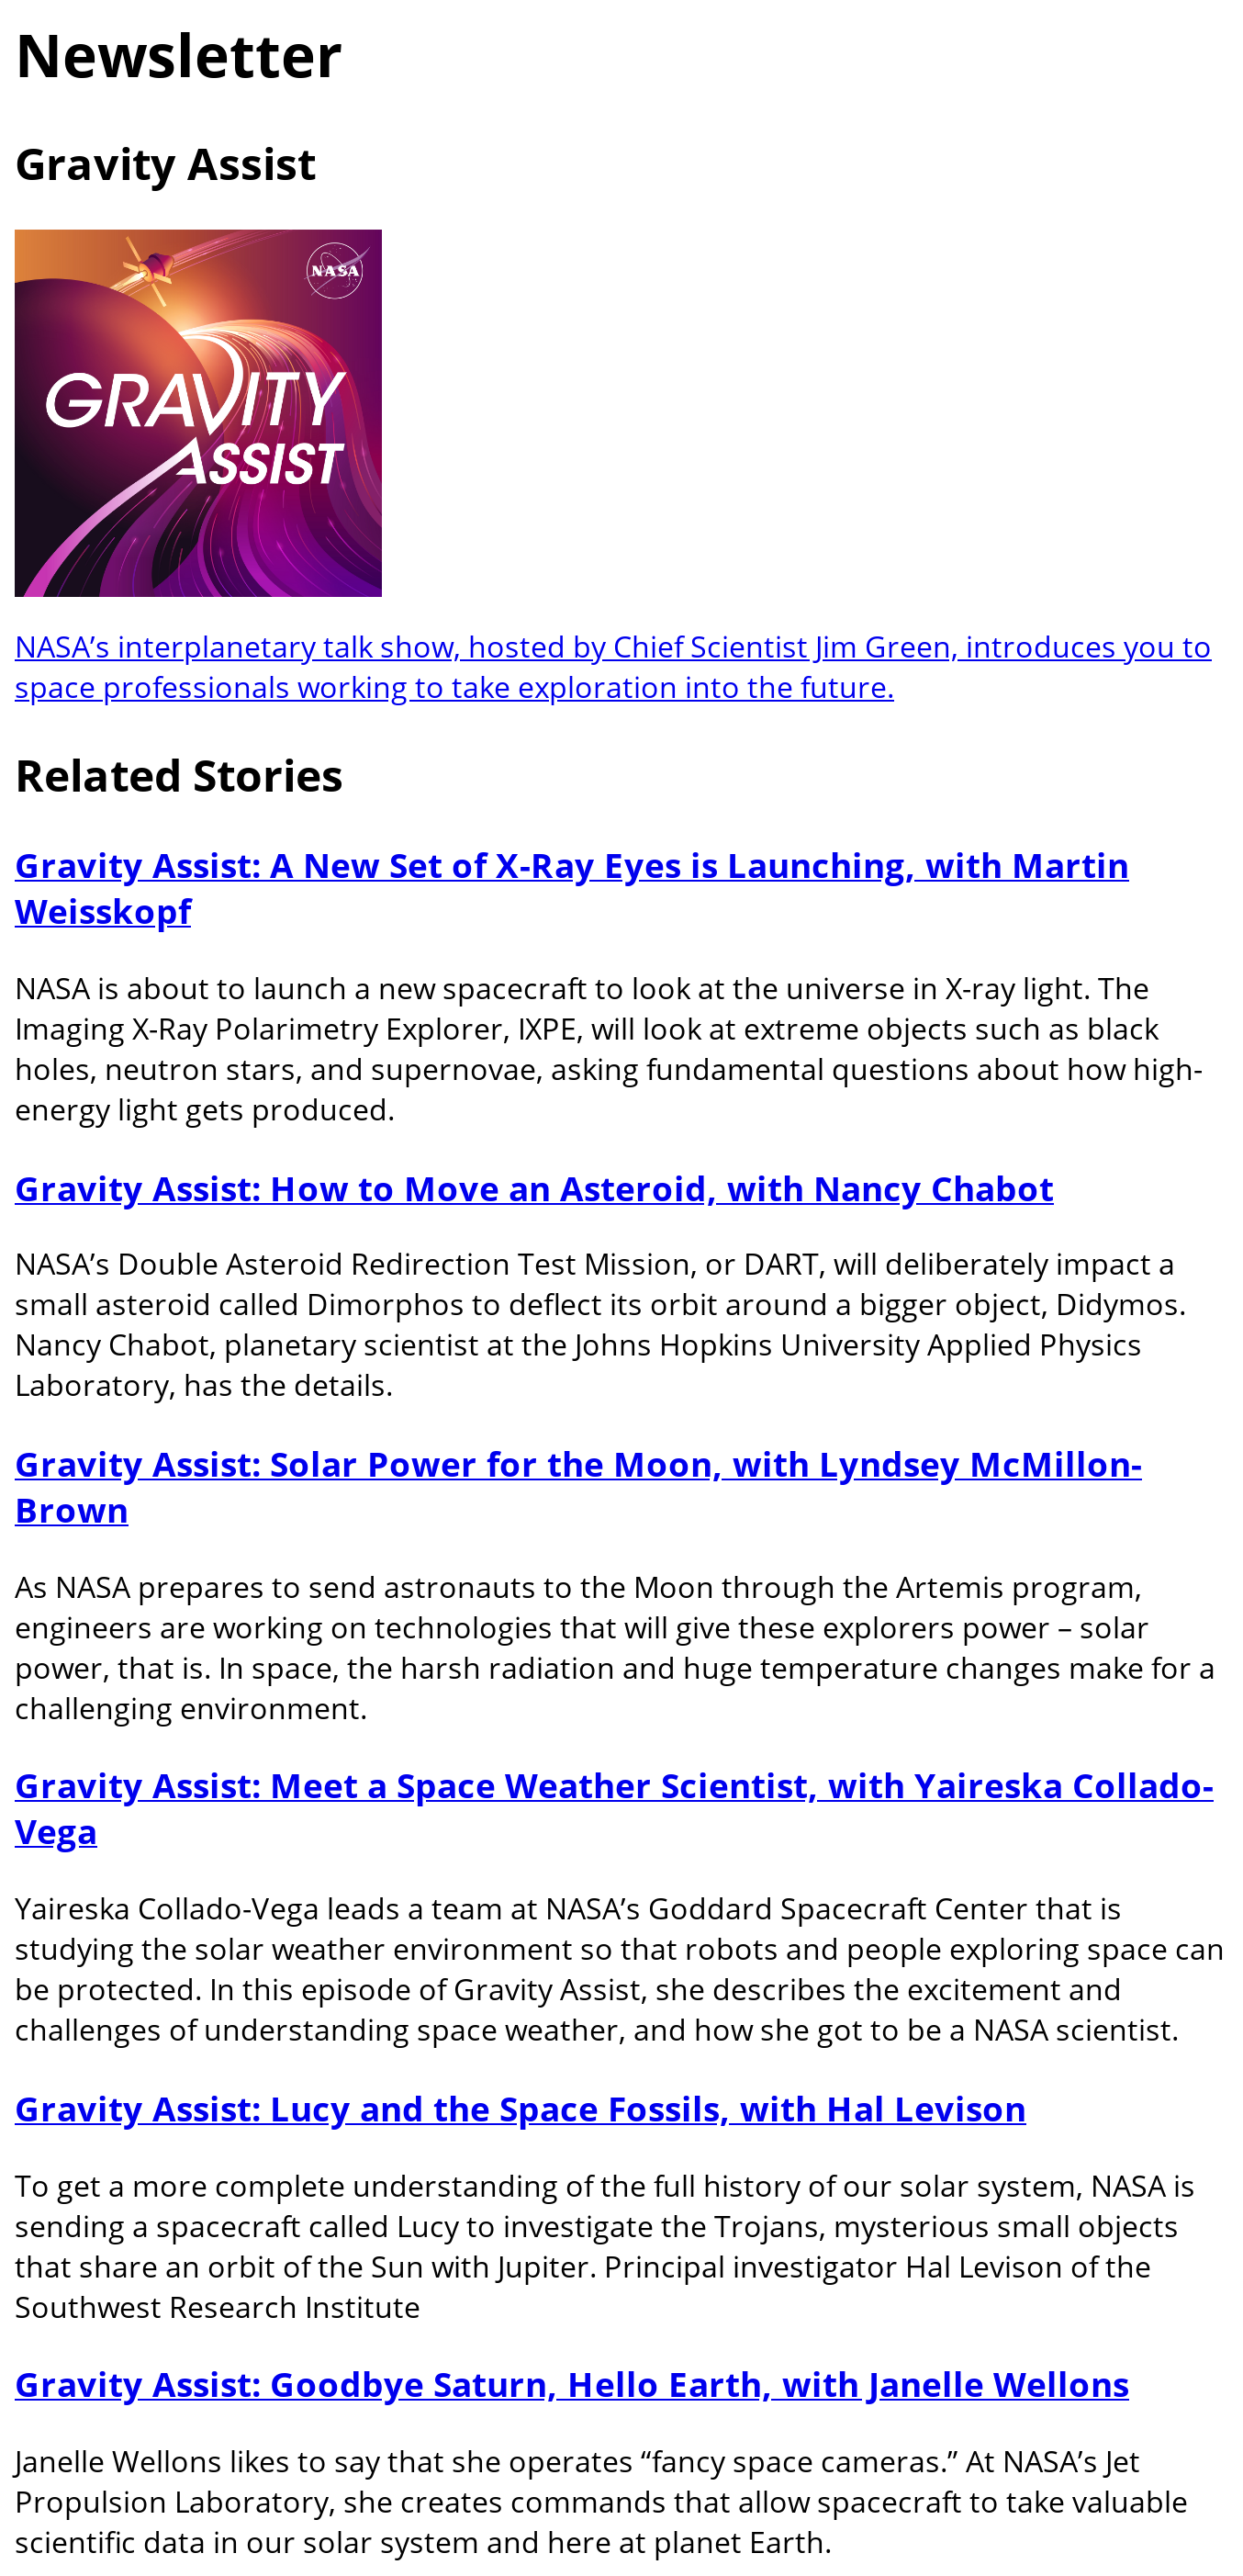 Image of a partial email, titled "Newsletter". The email contains content from NASA's Gravity Assist newsletter. The Gravity Assist logo is at the top. Below are a series of related stories each with title, link, and summary paragraph.